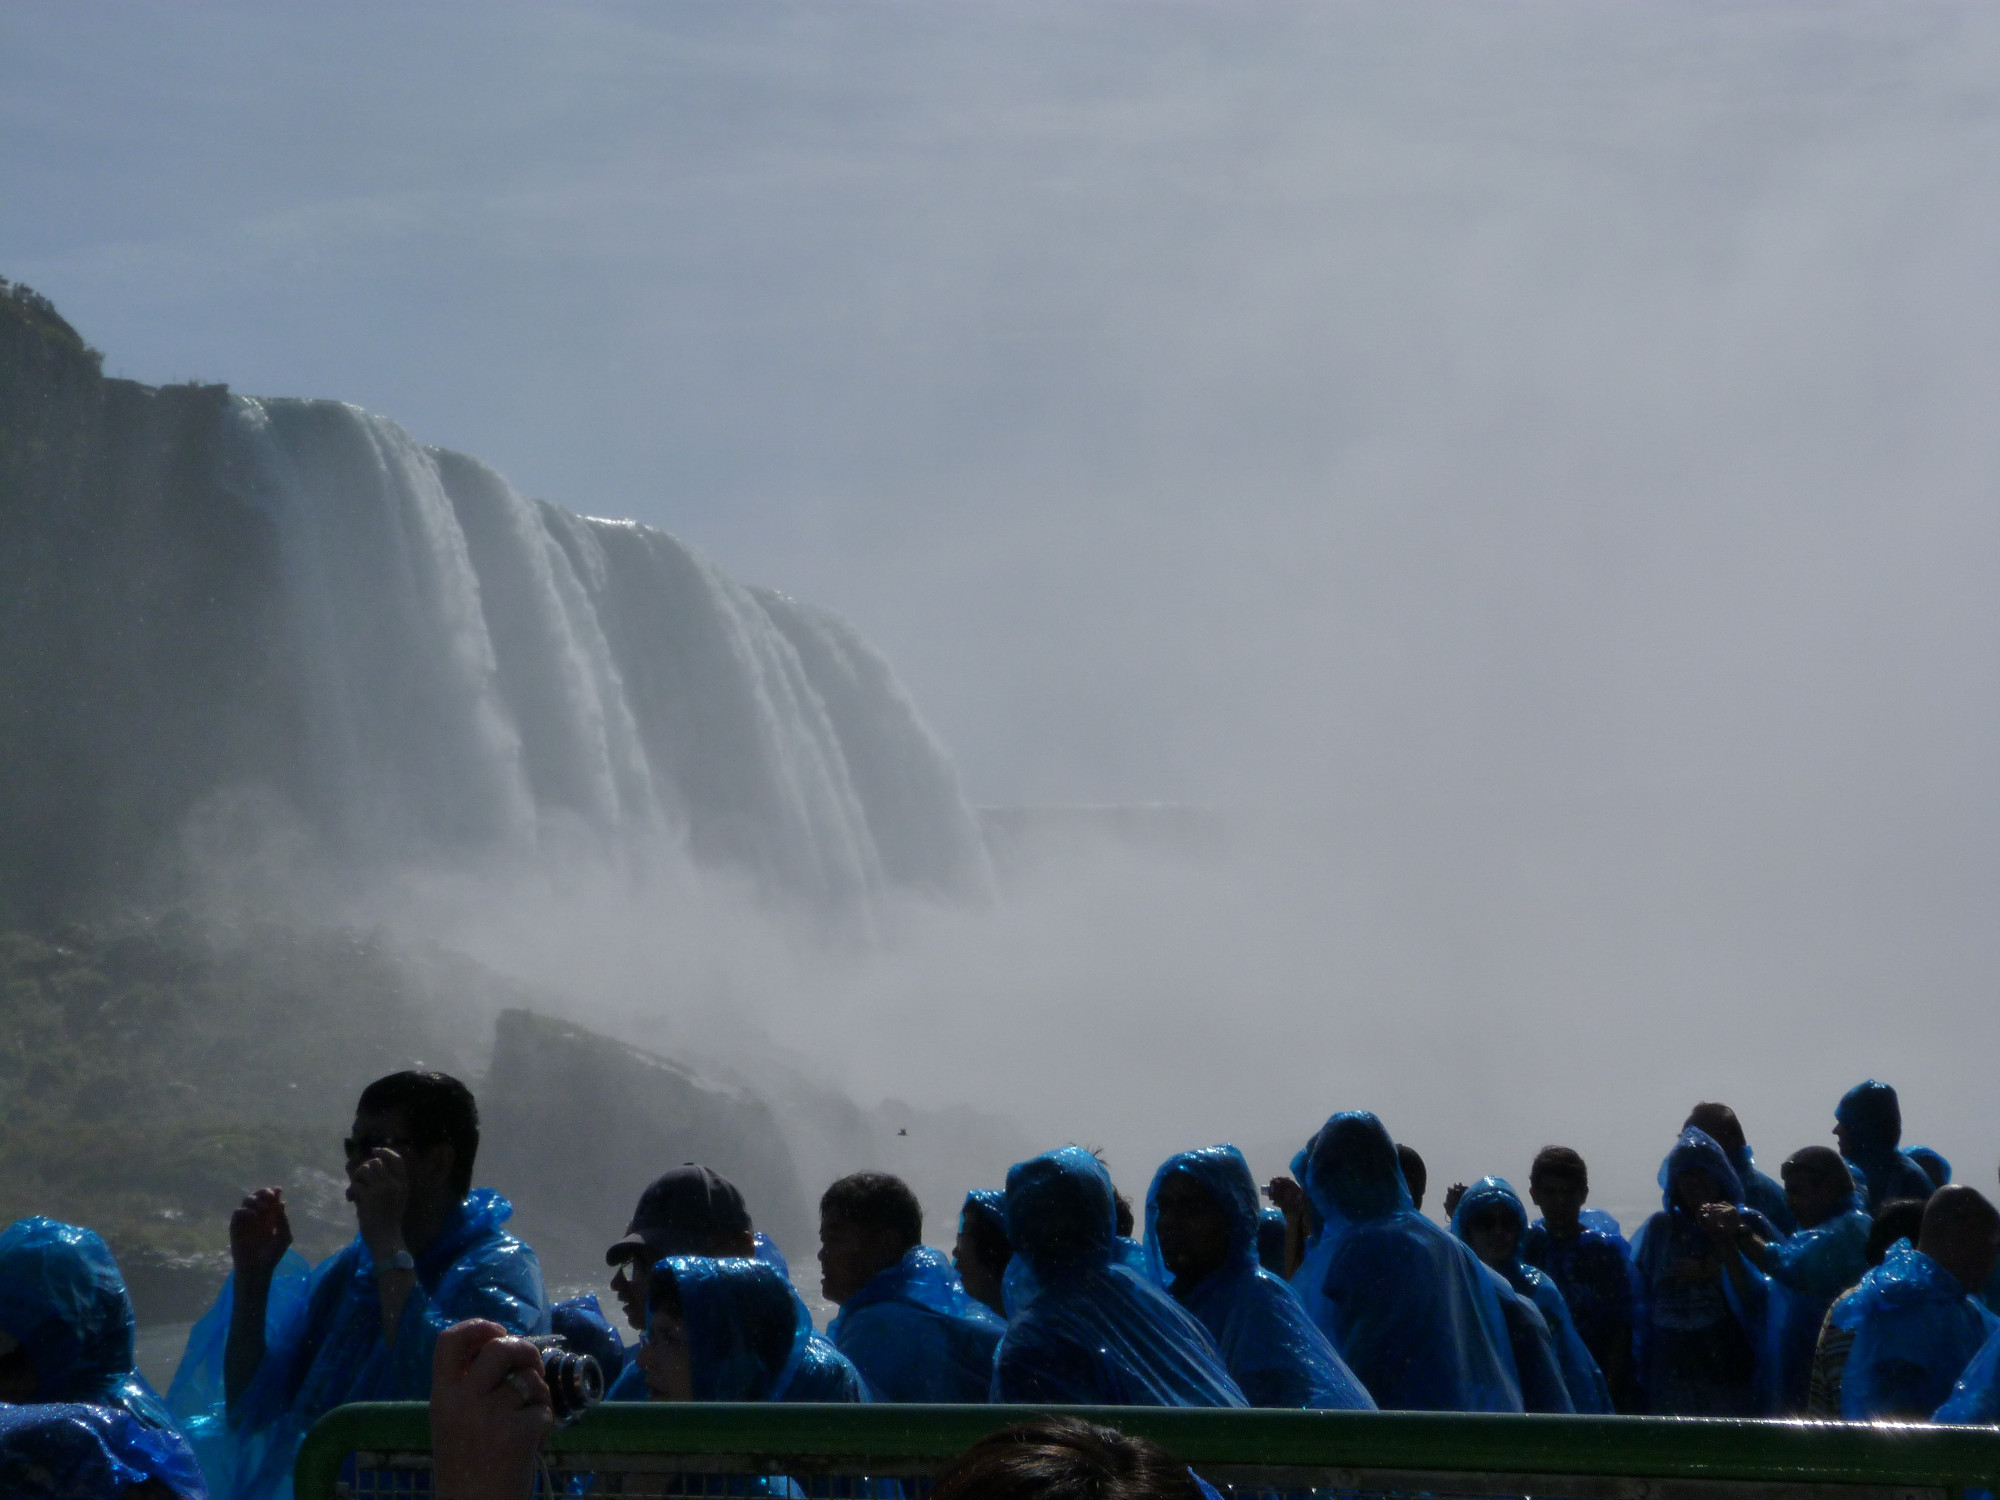 On The Maid Of The Mist